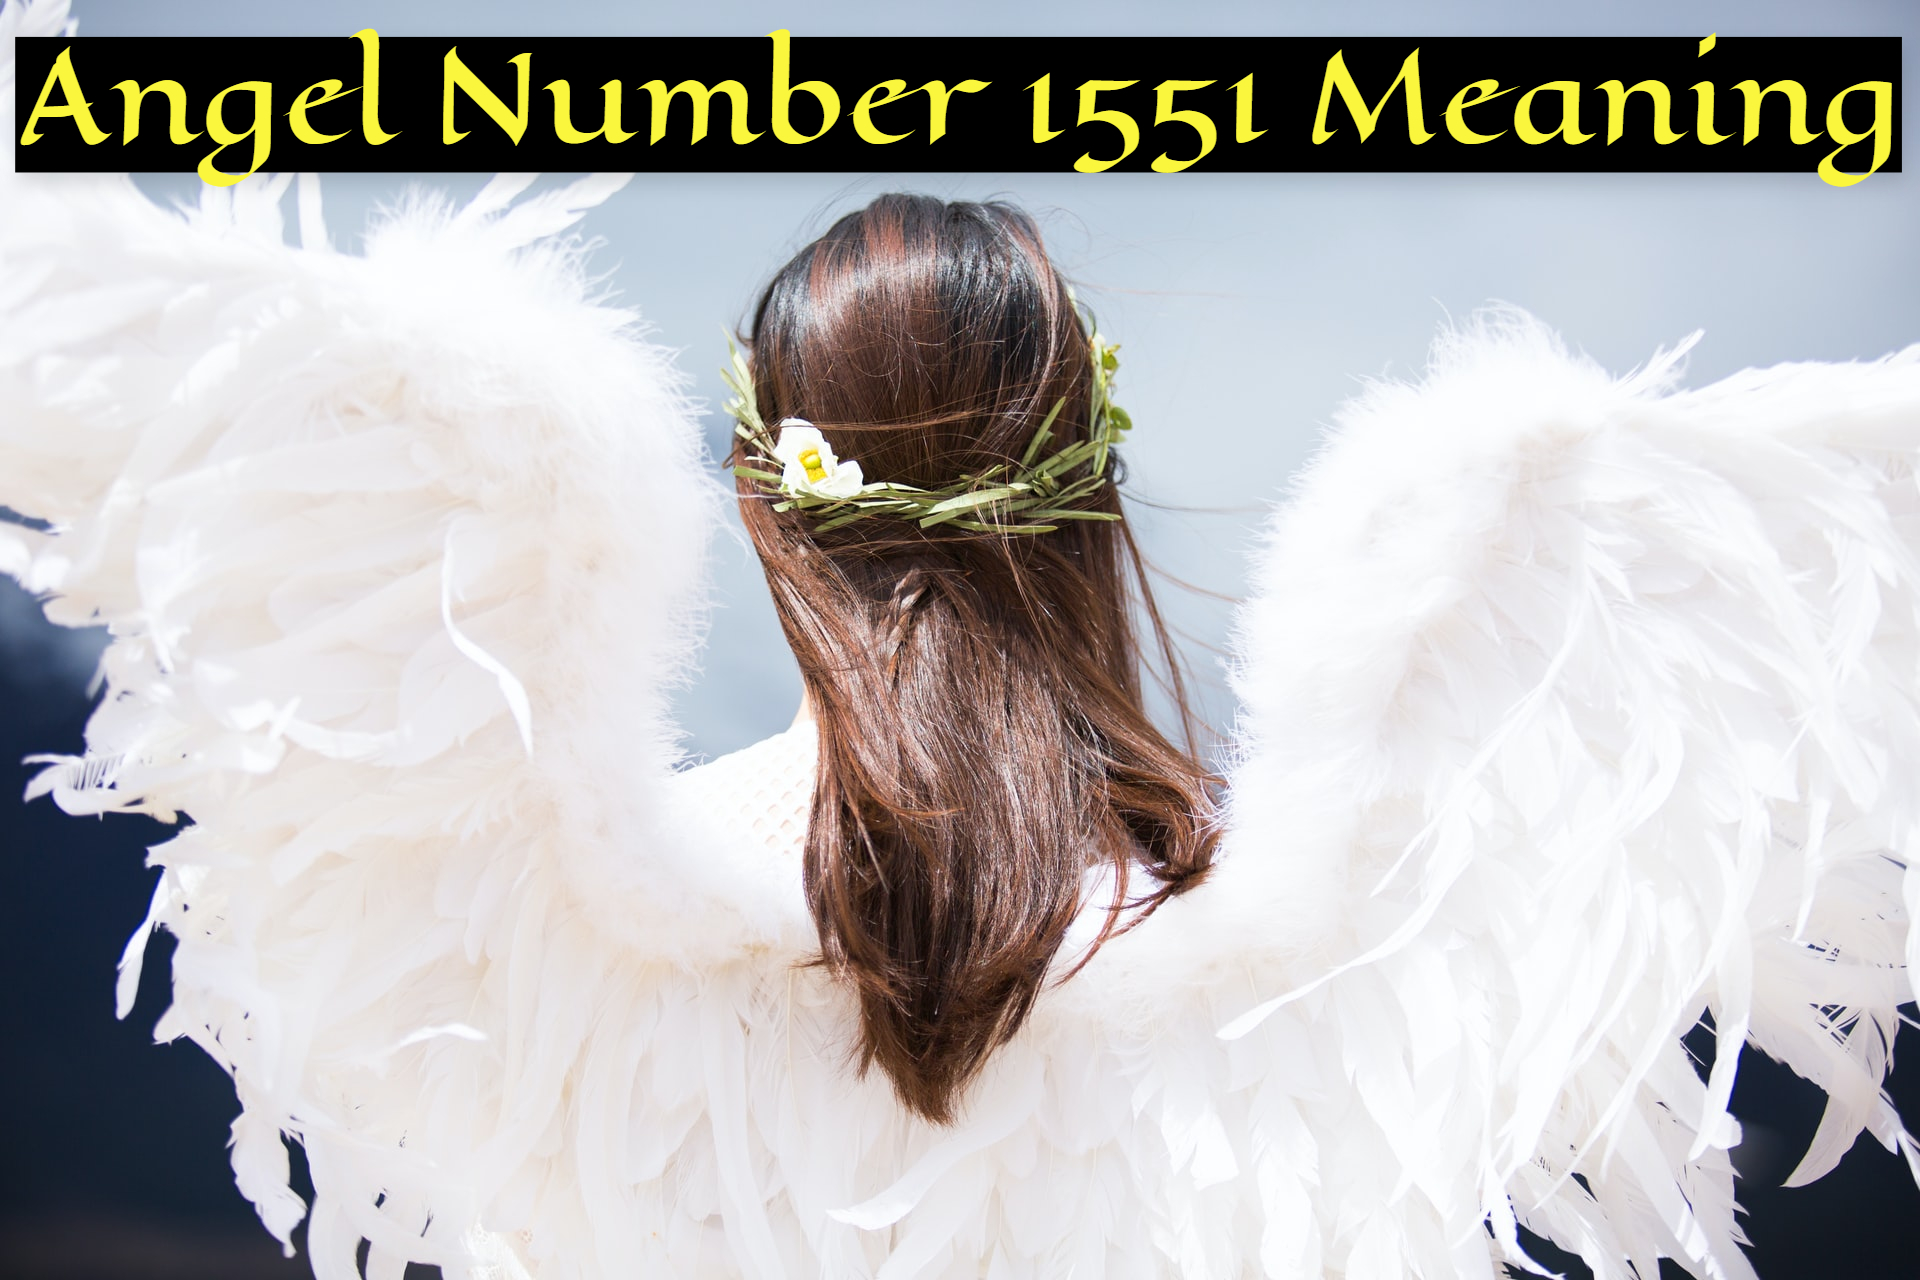 Angel Number 1551 Meaning Represents Bravery And Commitment